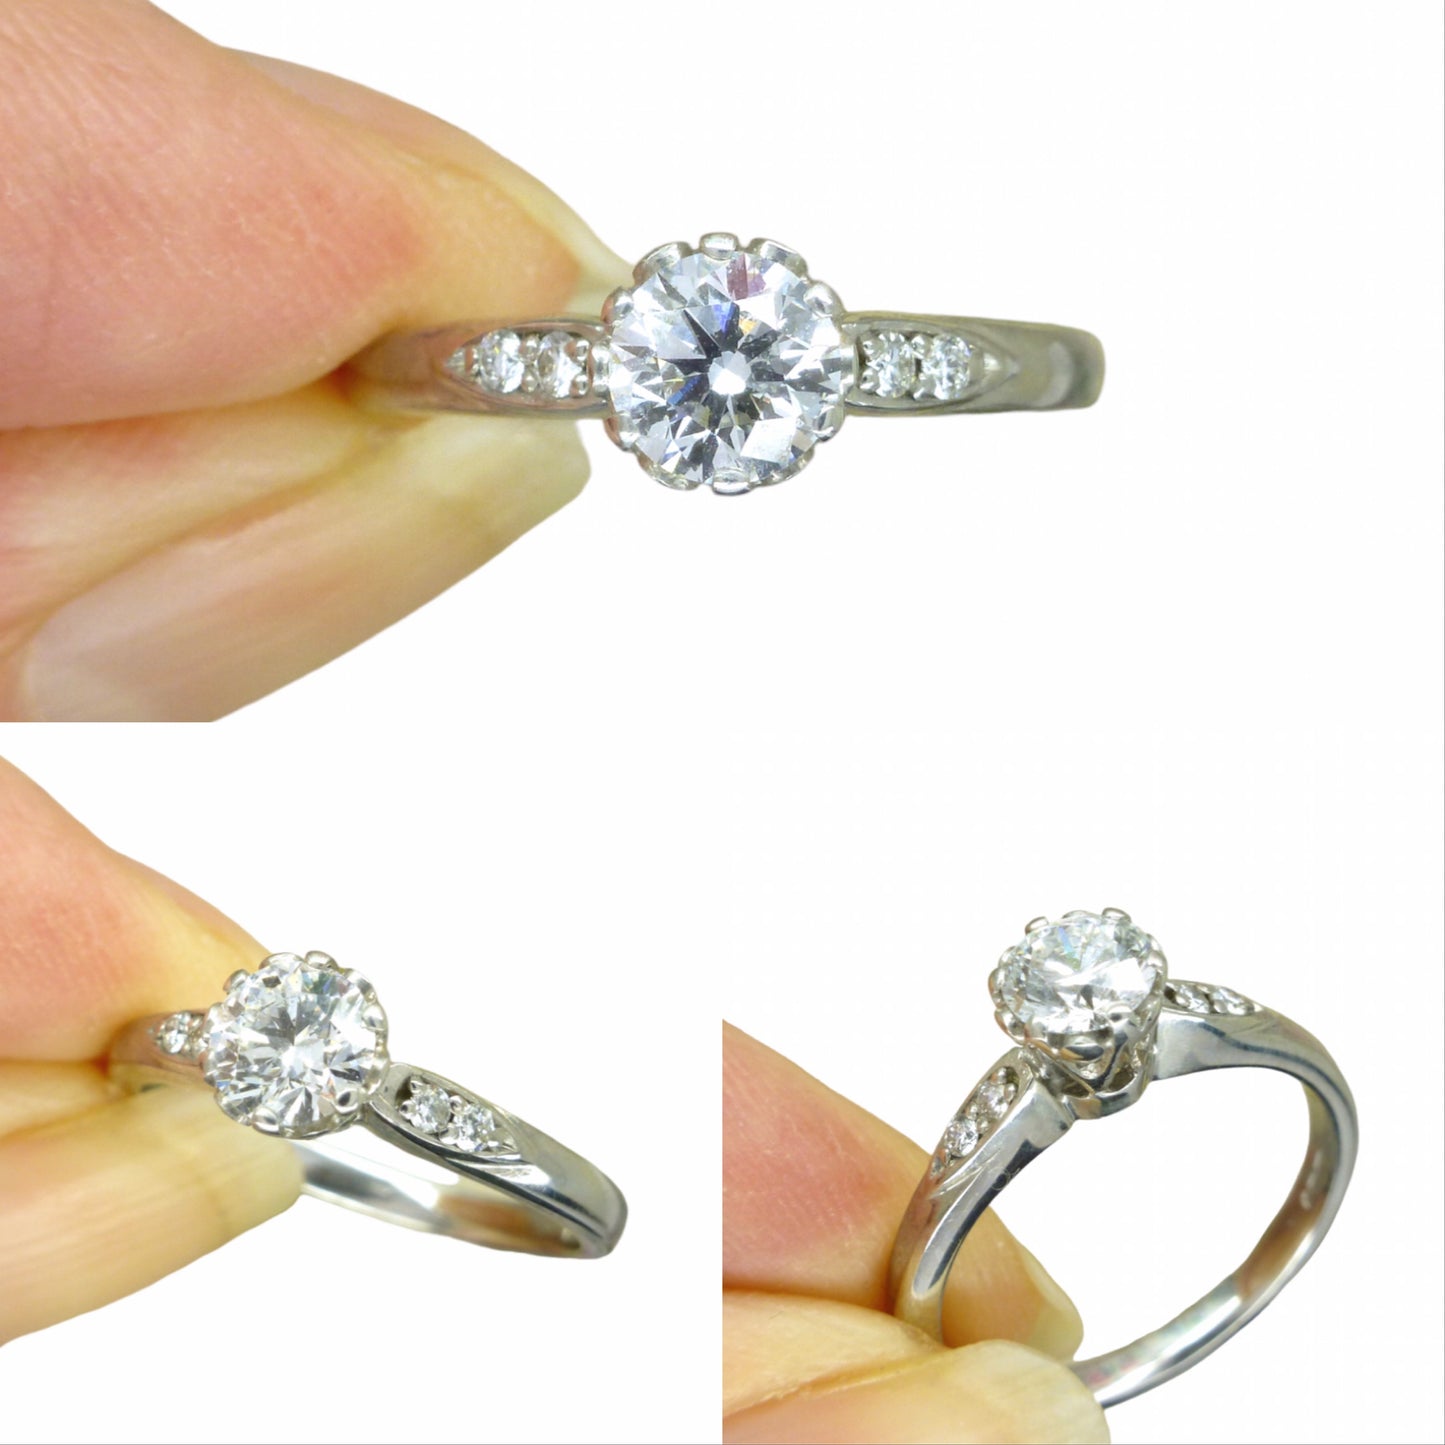 Vintage 9ct white gold diamond solitaire engagement ring G/H VS1/2 ~ 0.55ct